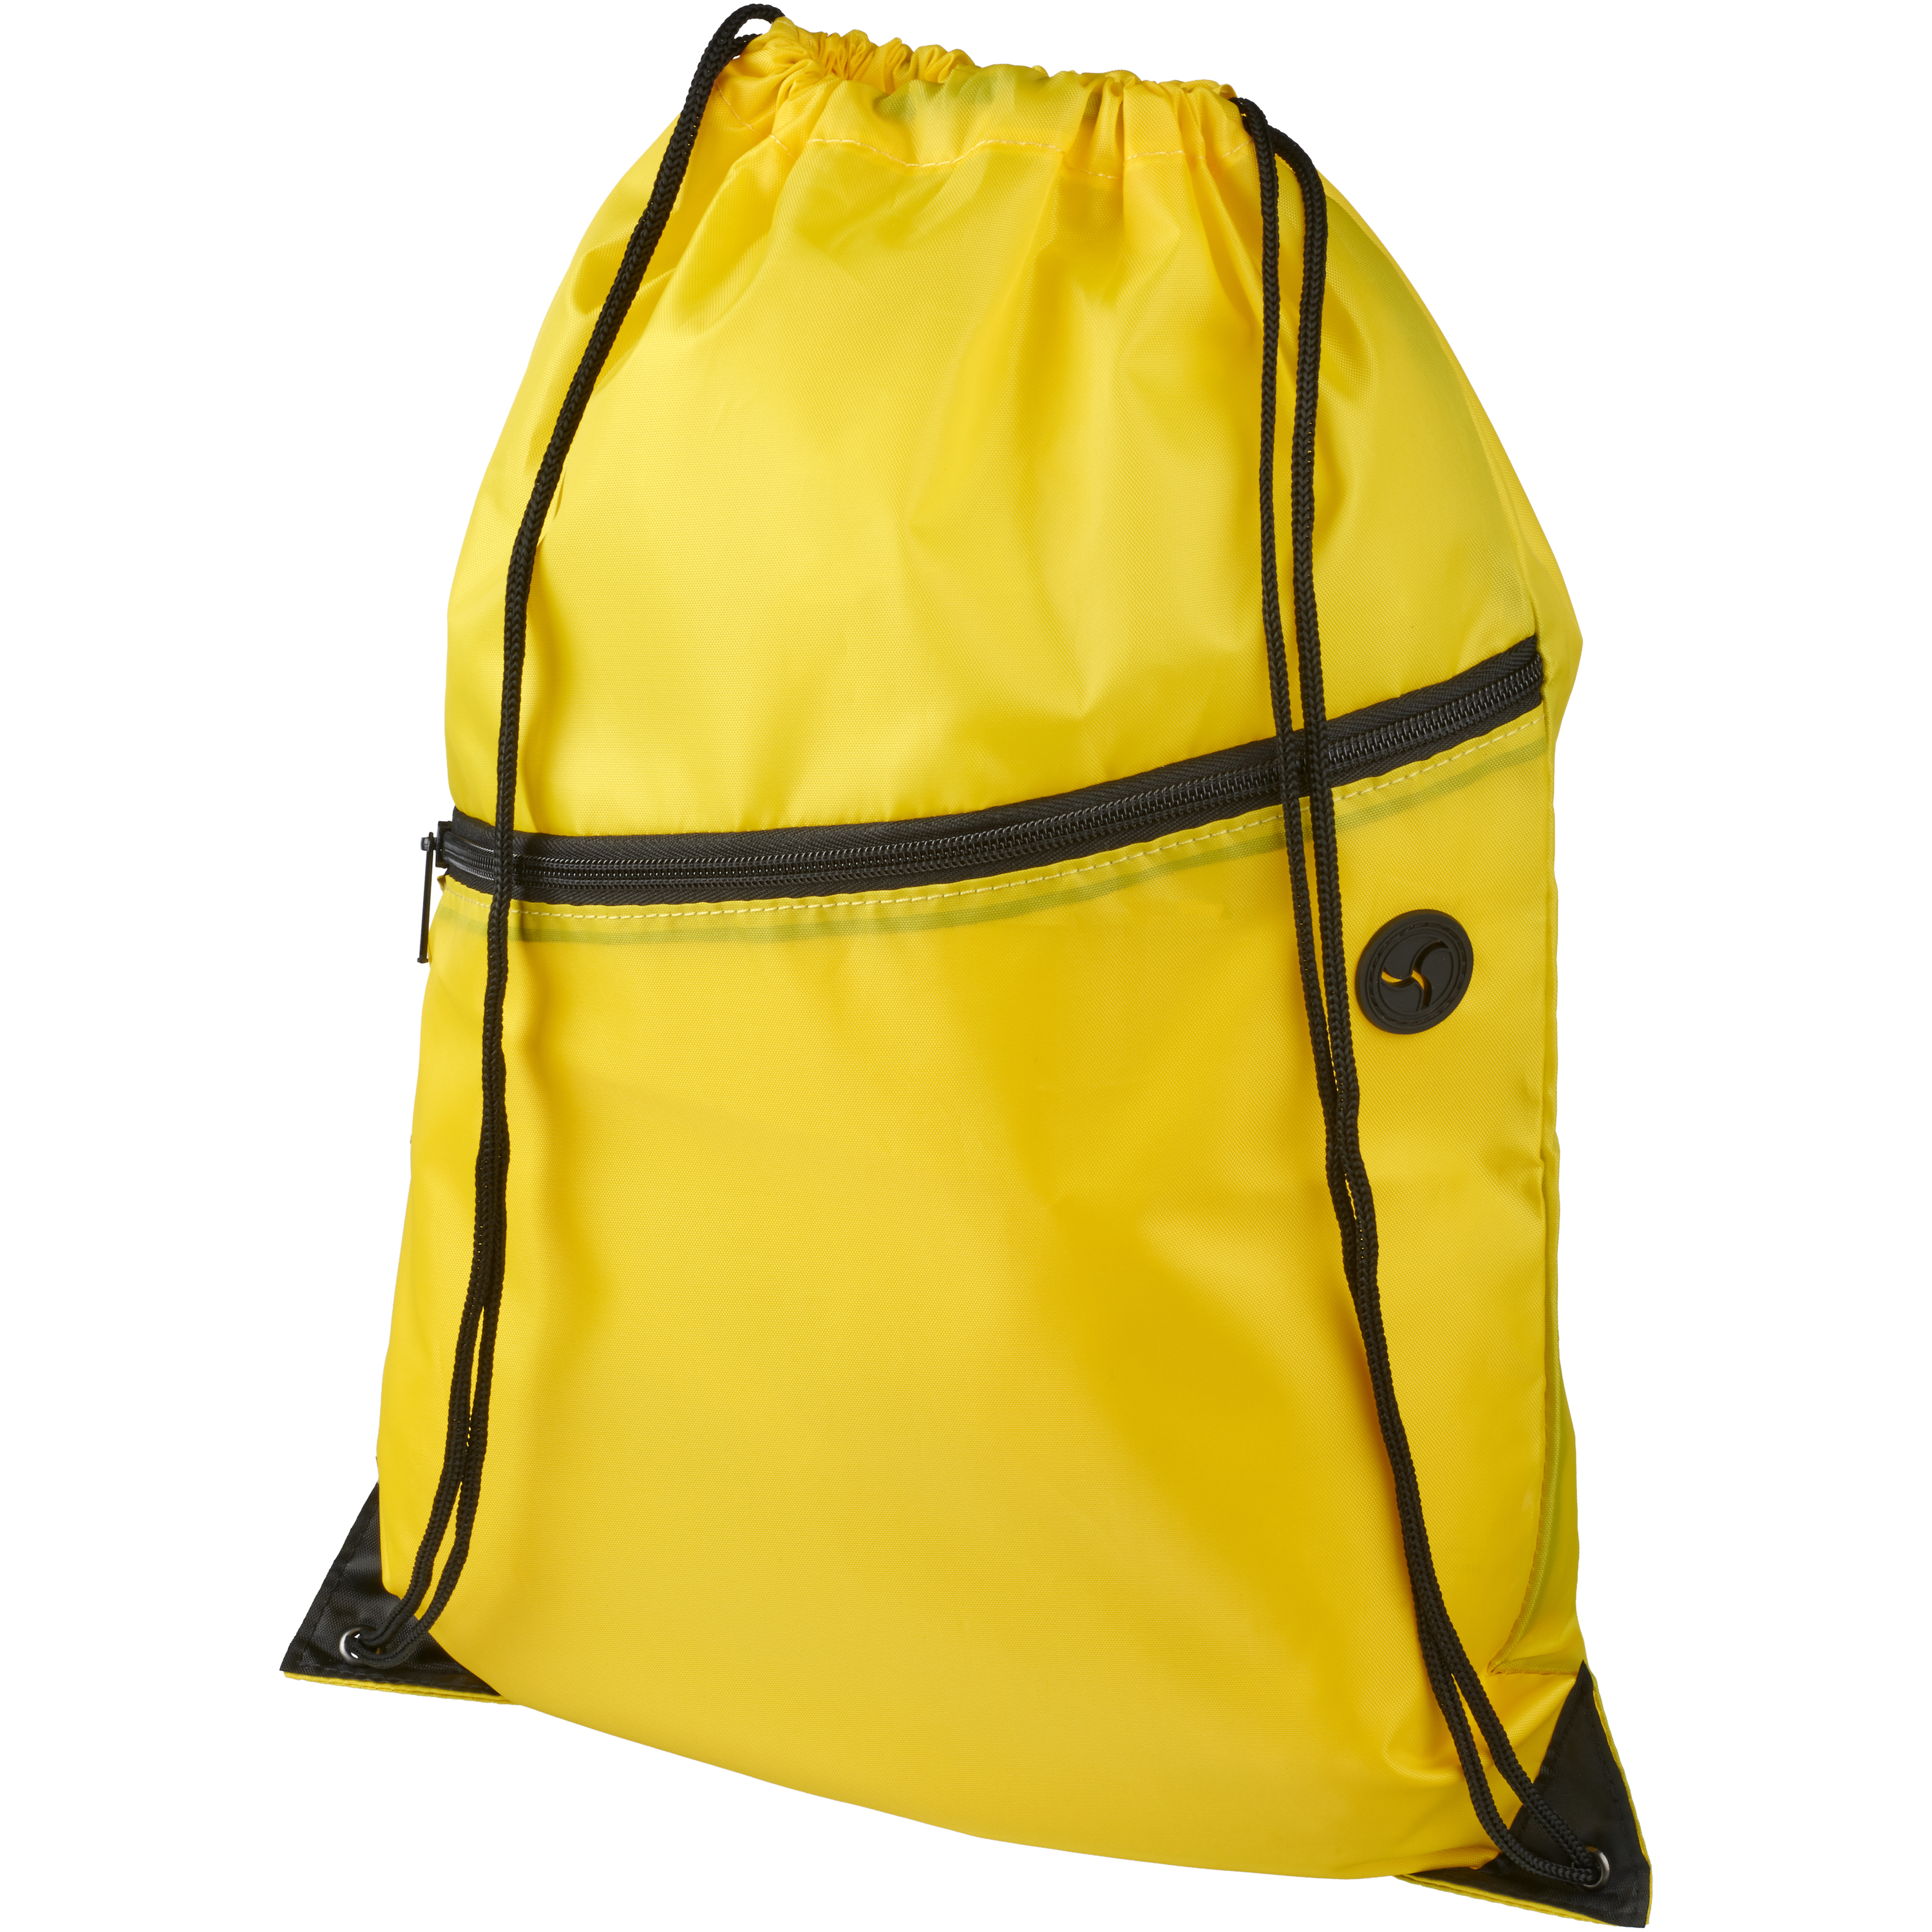 Oriole zippered drawstring backpack 5L